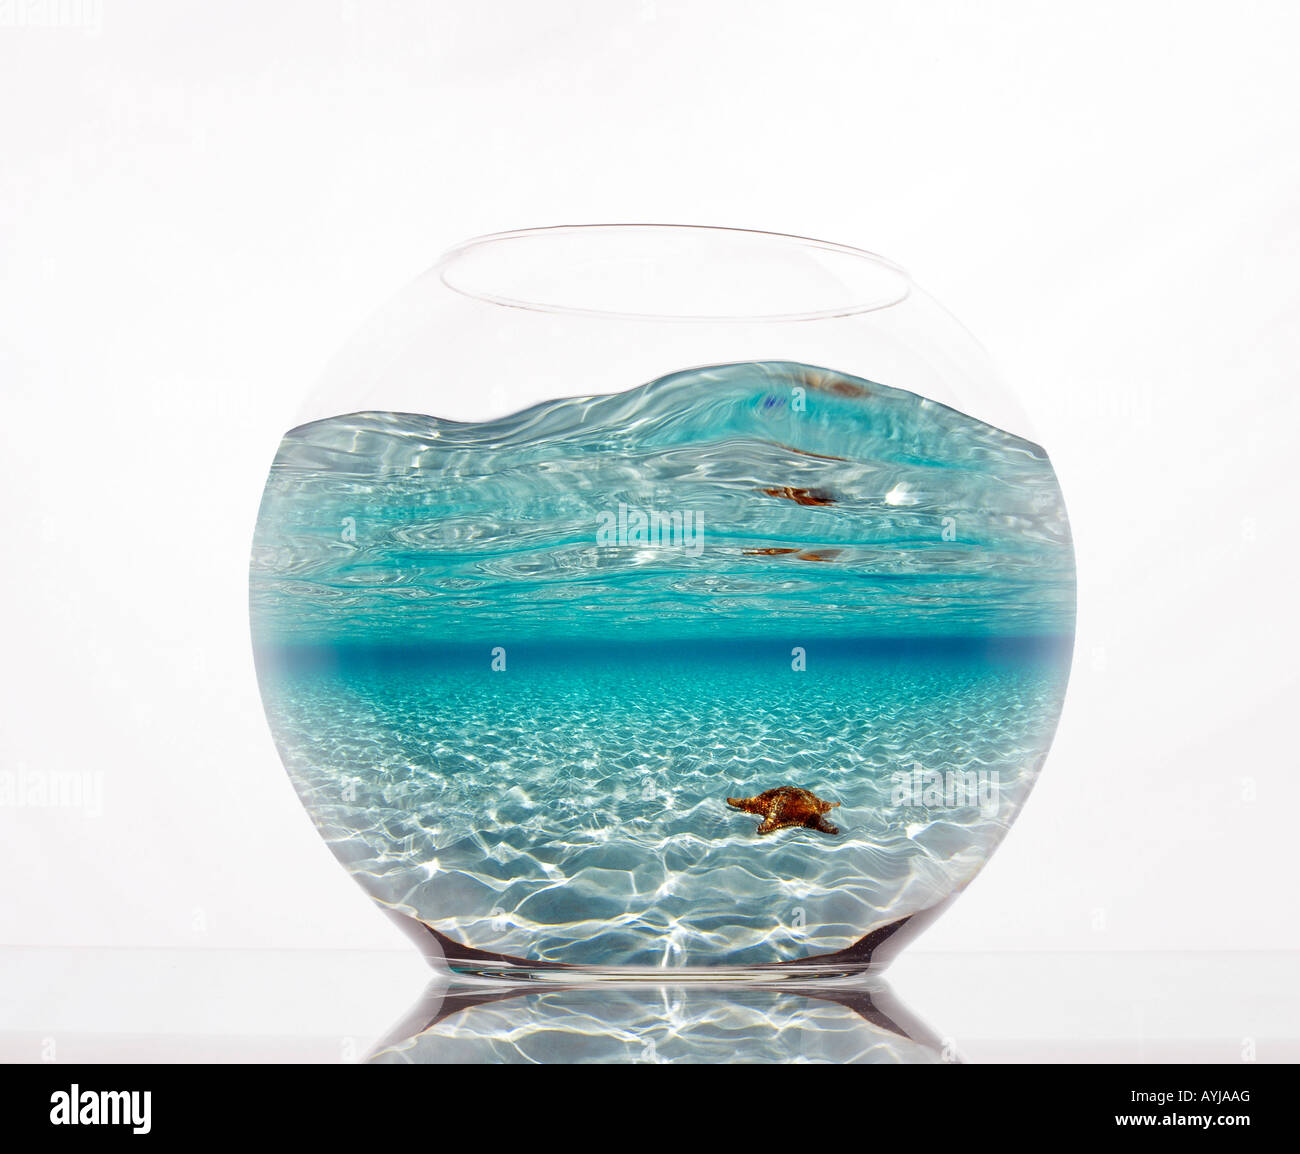 fishbowl composite with sea star in shallow water Stock Photo